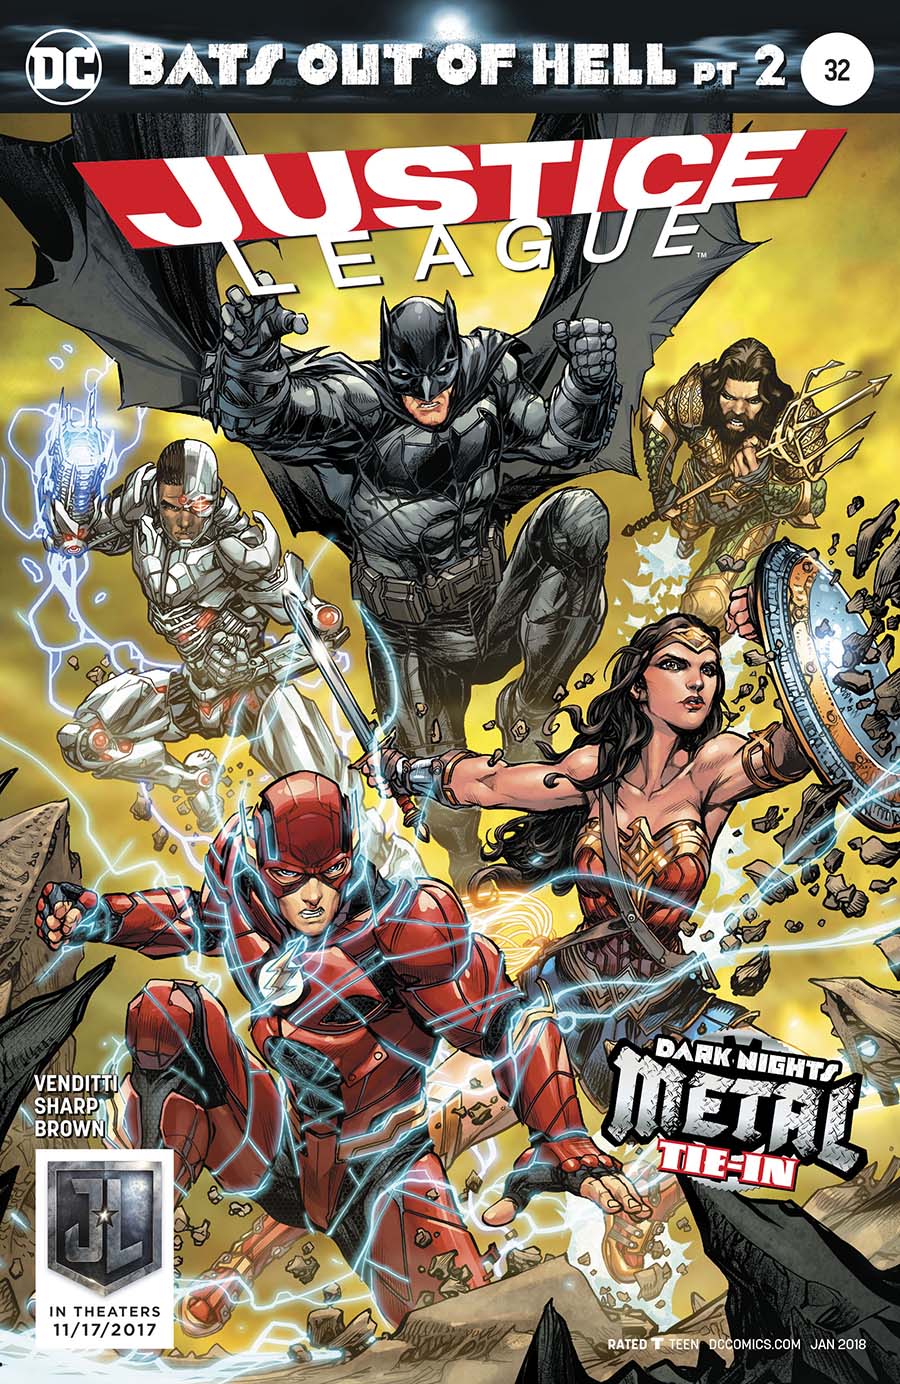 Justice League Vol 3 #32 Cover B Variant Howard Porter Justice League Cover (Bats Out Of Hell Part 2)(Dark Nights Metal Tie-In)